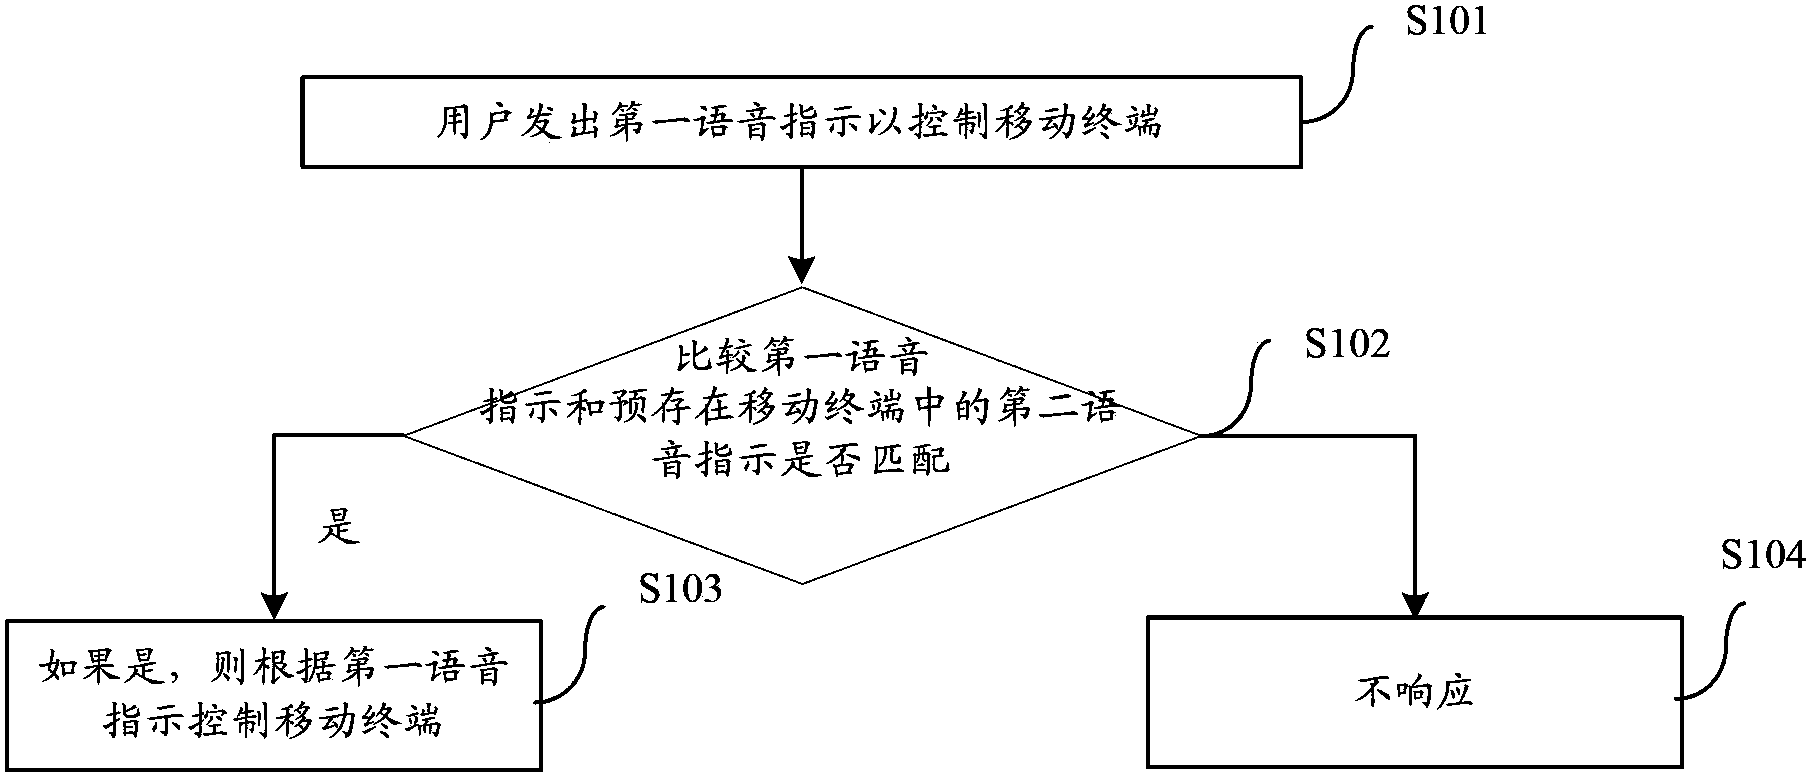 Mobile terminal control method and mobile terminal control device